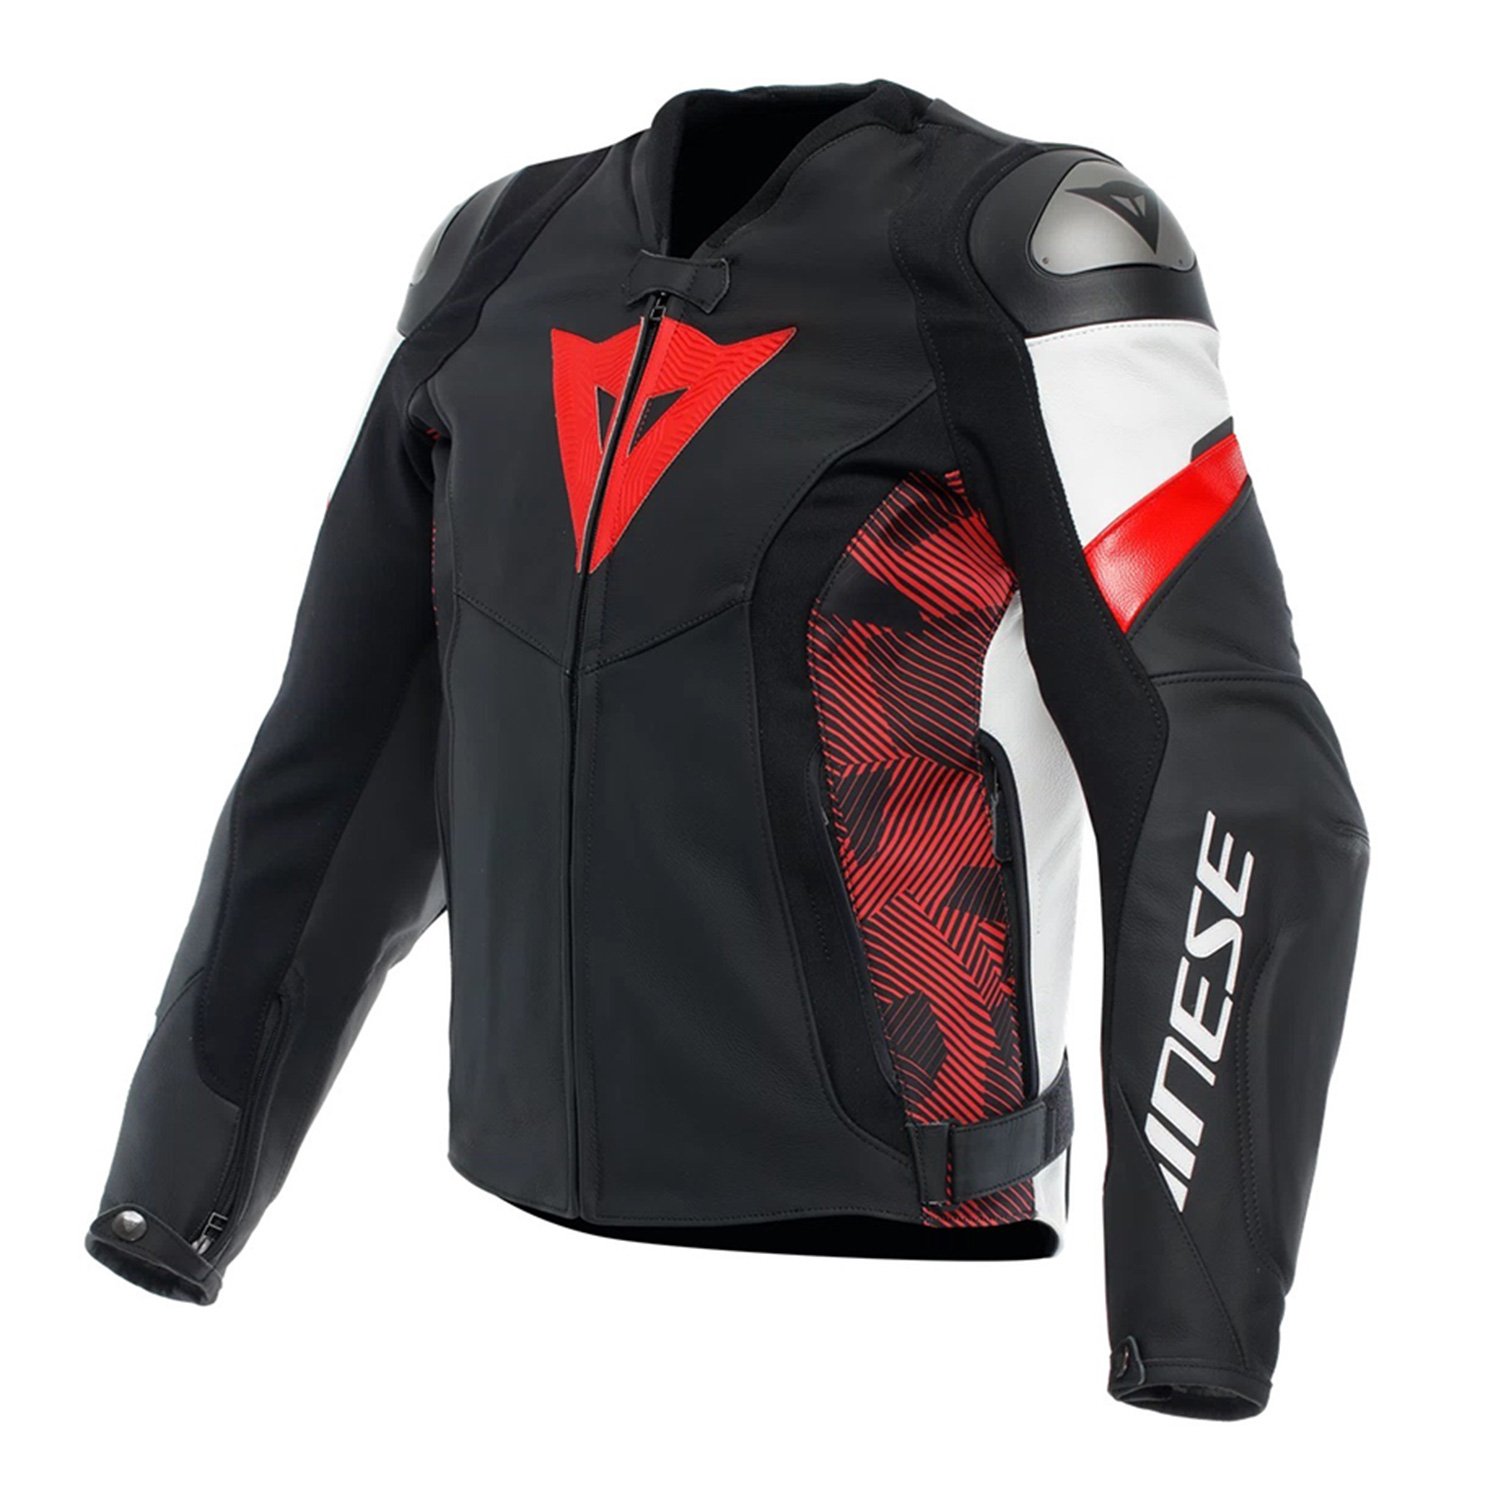 Image of Dainese Avro Leather 5 Jacket Black Red Lava White Size 58 ID 8051019639677